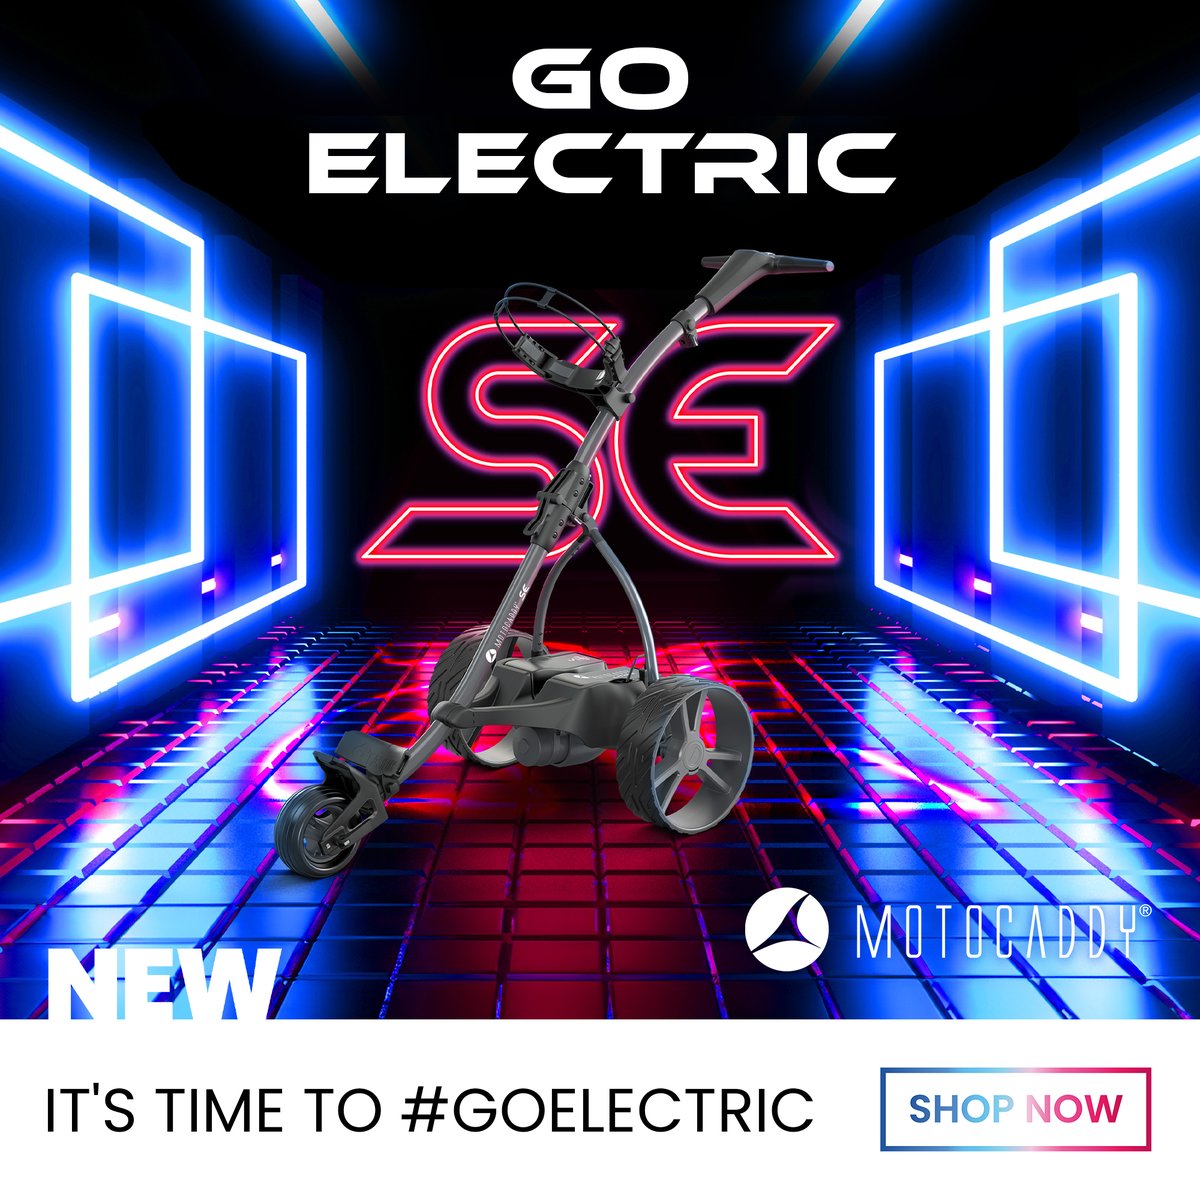 🚨 ELECTRIC TROLLEY ALERT 🚨 Introducing the revolutionary new SE electric trolley - bringing customary Motocaddy styling, performance, quality & reliability at an affordable price. It's time for more golfers to #GOELECTRIC. Shop now: bit.ly/49xCjGc